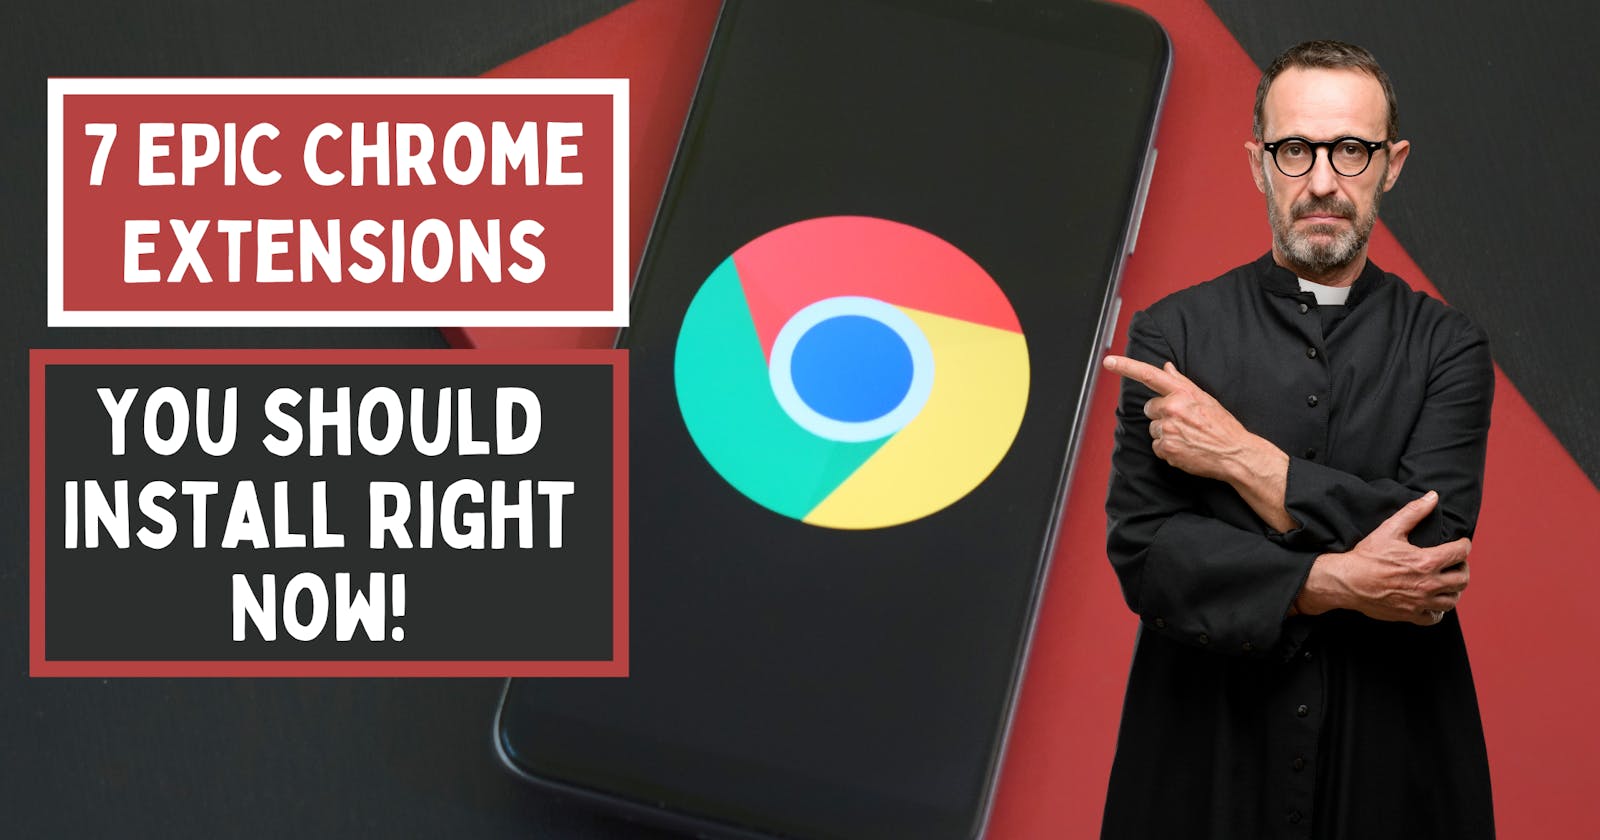 7 Epic Chrome Extensions You Should Install Right Now!